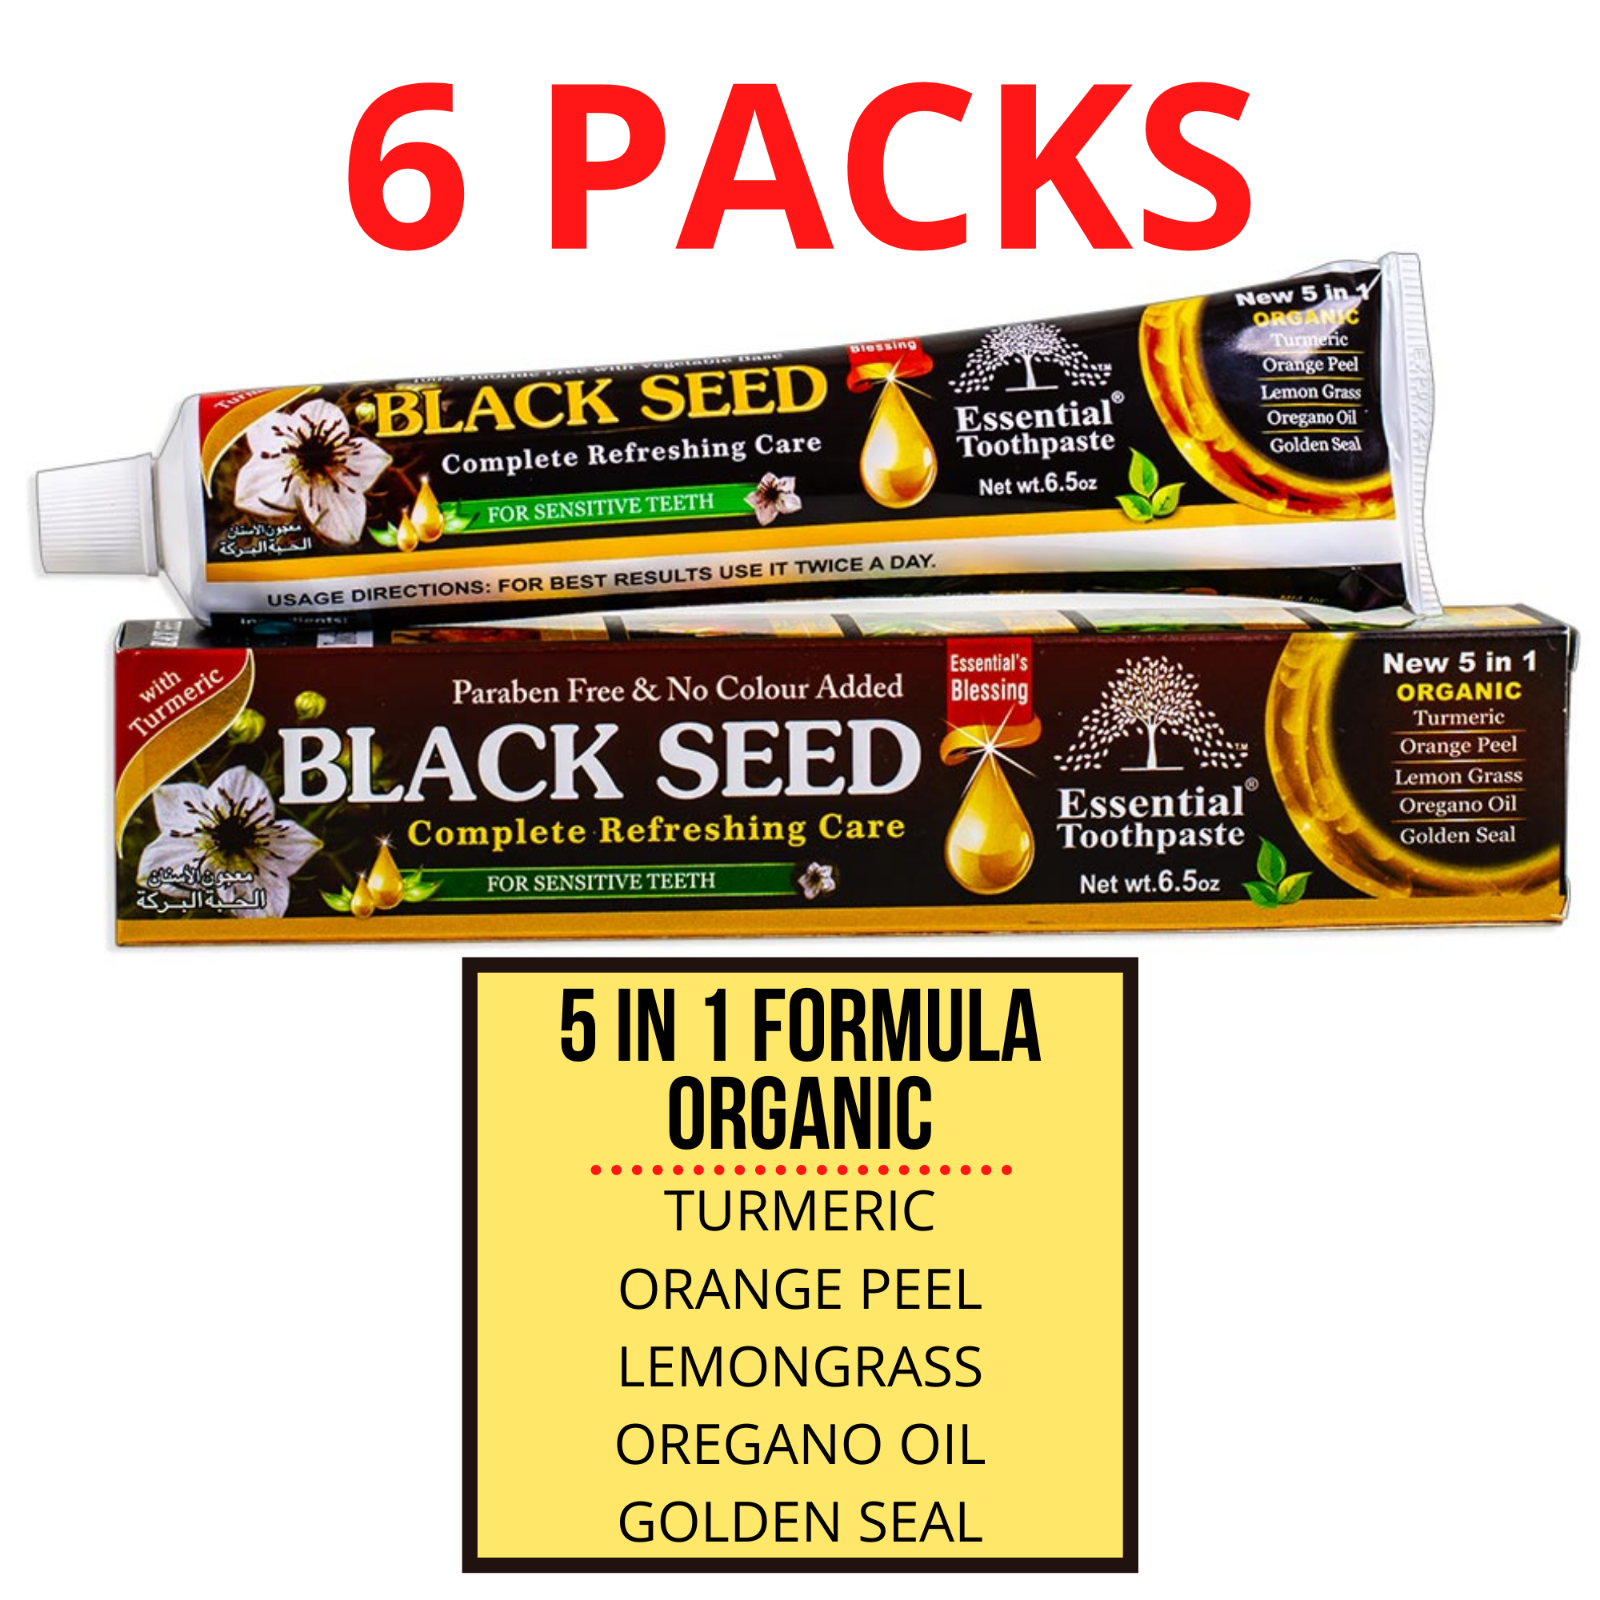 6 PACK- BLACK SEED Toothpaste, Natural & Organic Formula, Fluoride Free Essential Palace SEED Toothpaste